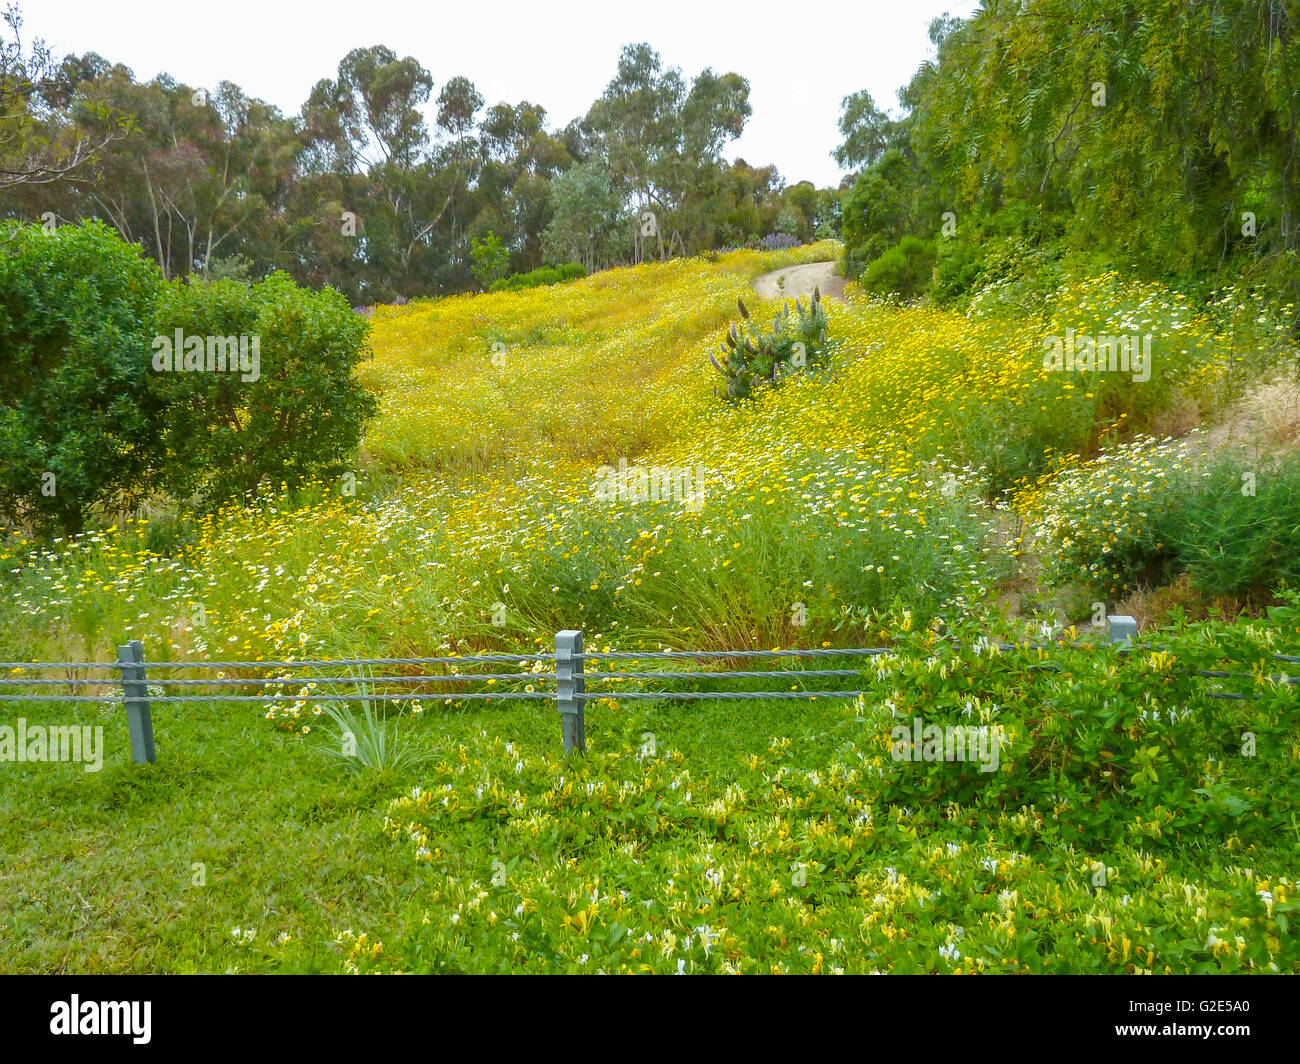 beautiful southern California landscape in April with trees, flowering plants and a path Stock Photo